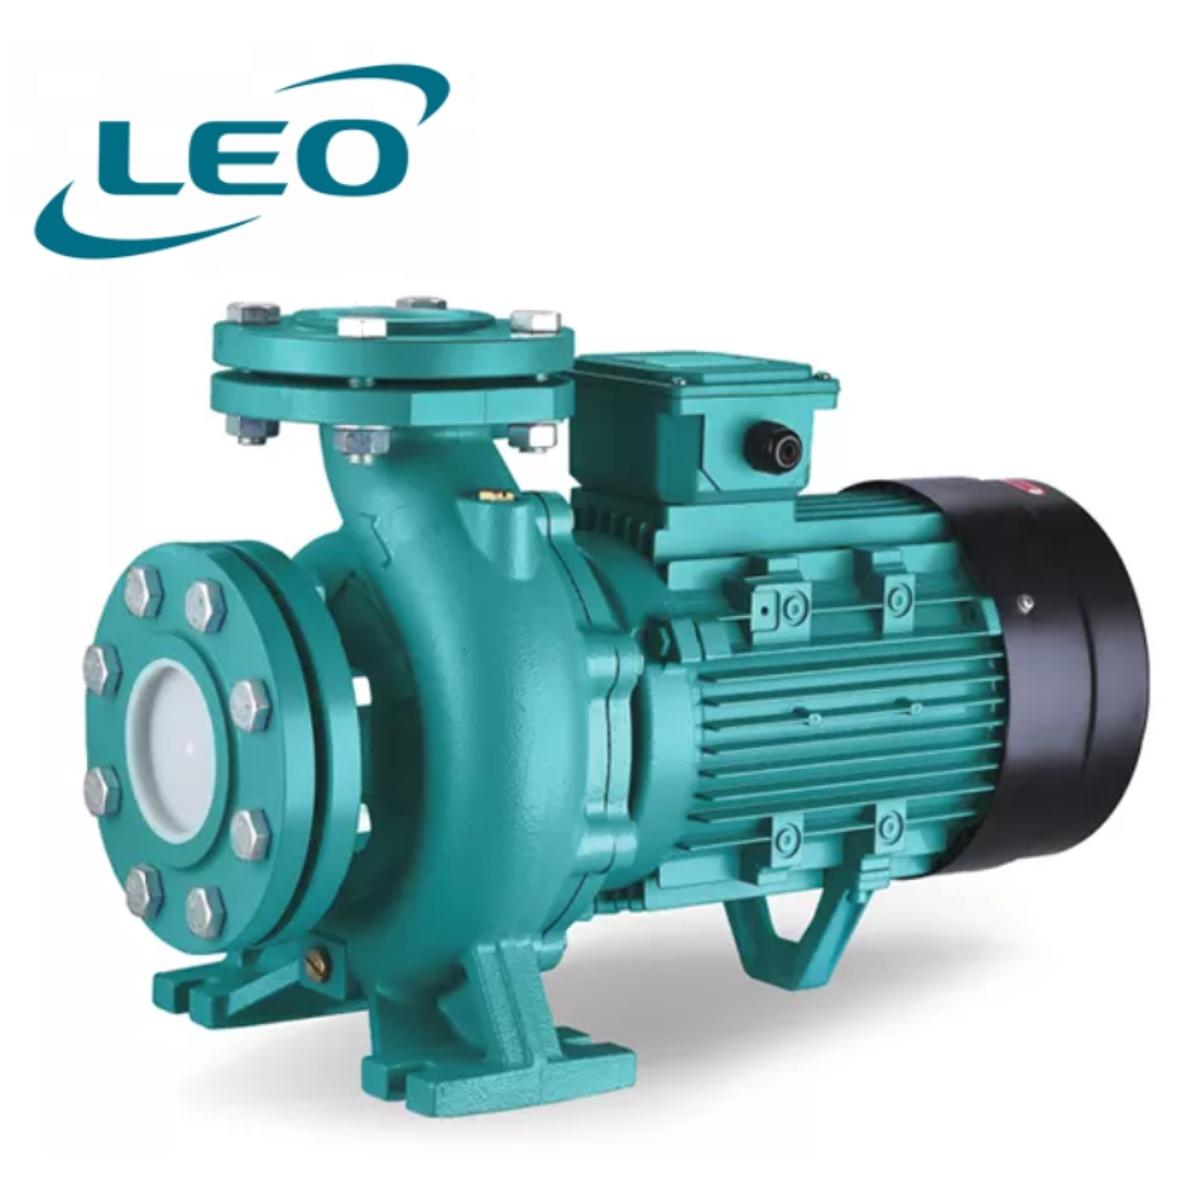 LEO - XST-40-160-30 - 3000 W - 4.0 HP - Clean Water HEAVY DUTY Centrifugal Pump With FLANGES  - 380V~400V THREE PHASE - SIZE :- 2 1-2" x 1 1-2 " - European STANDARD